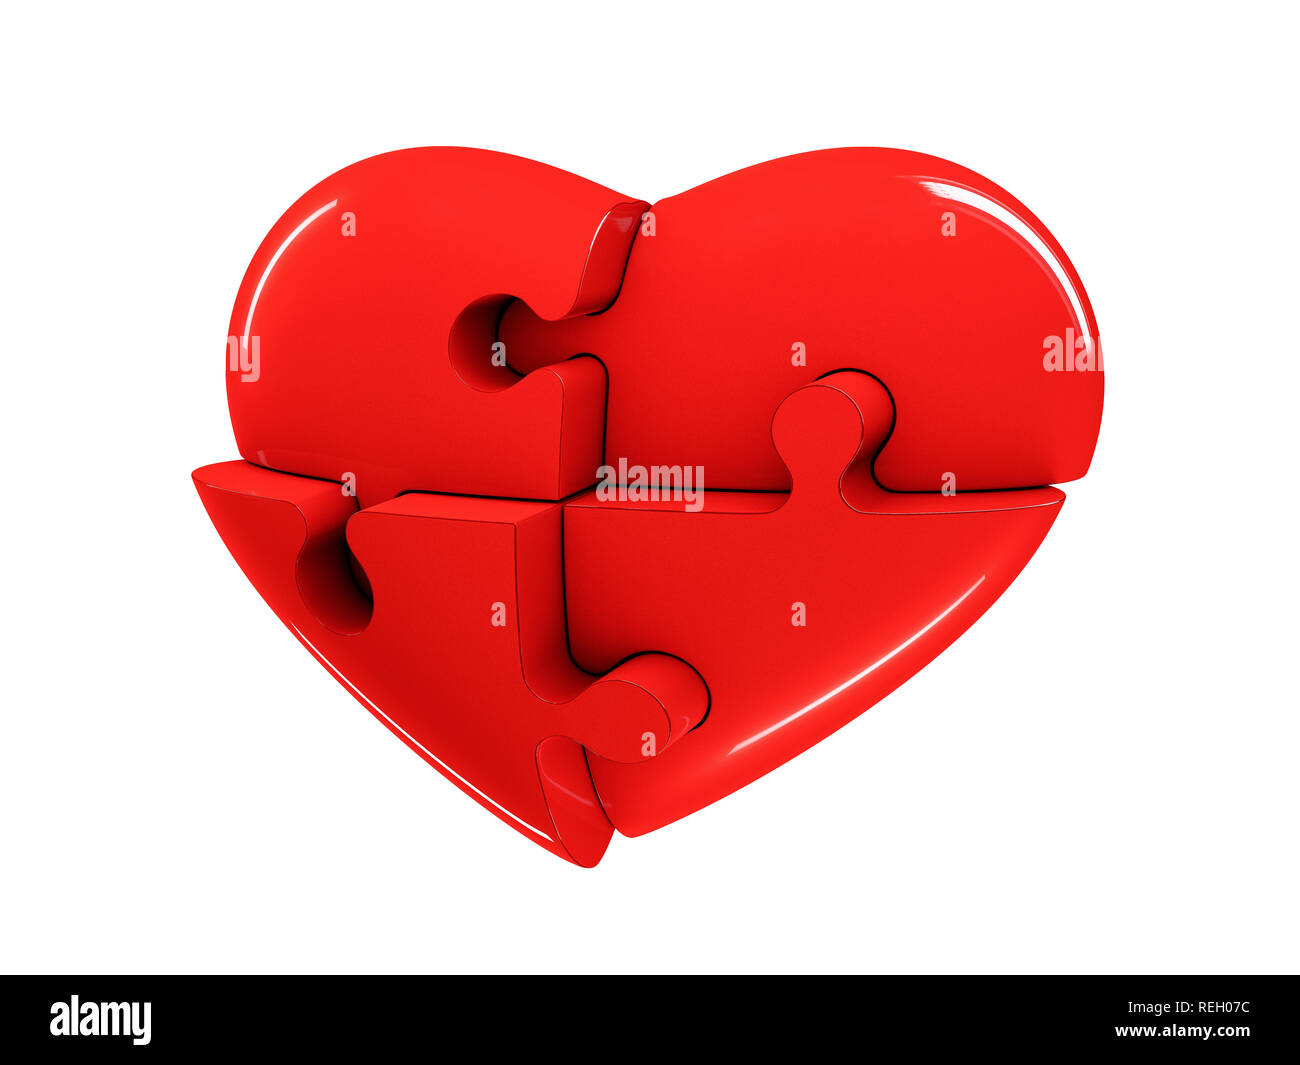 Red jigsaw puzzle heart diagram 3d illustration isolated ...